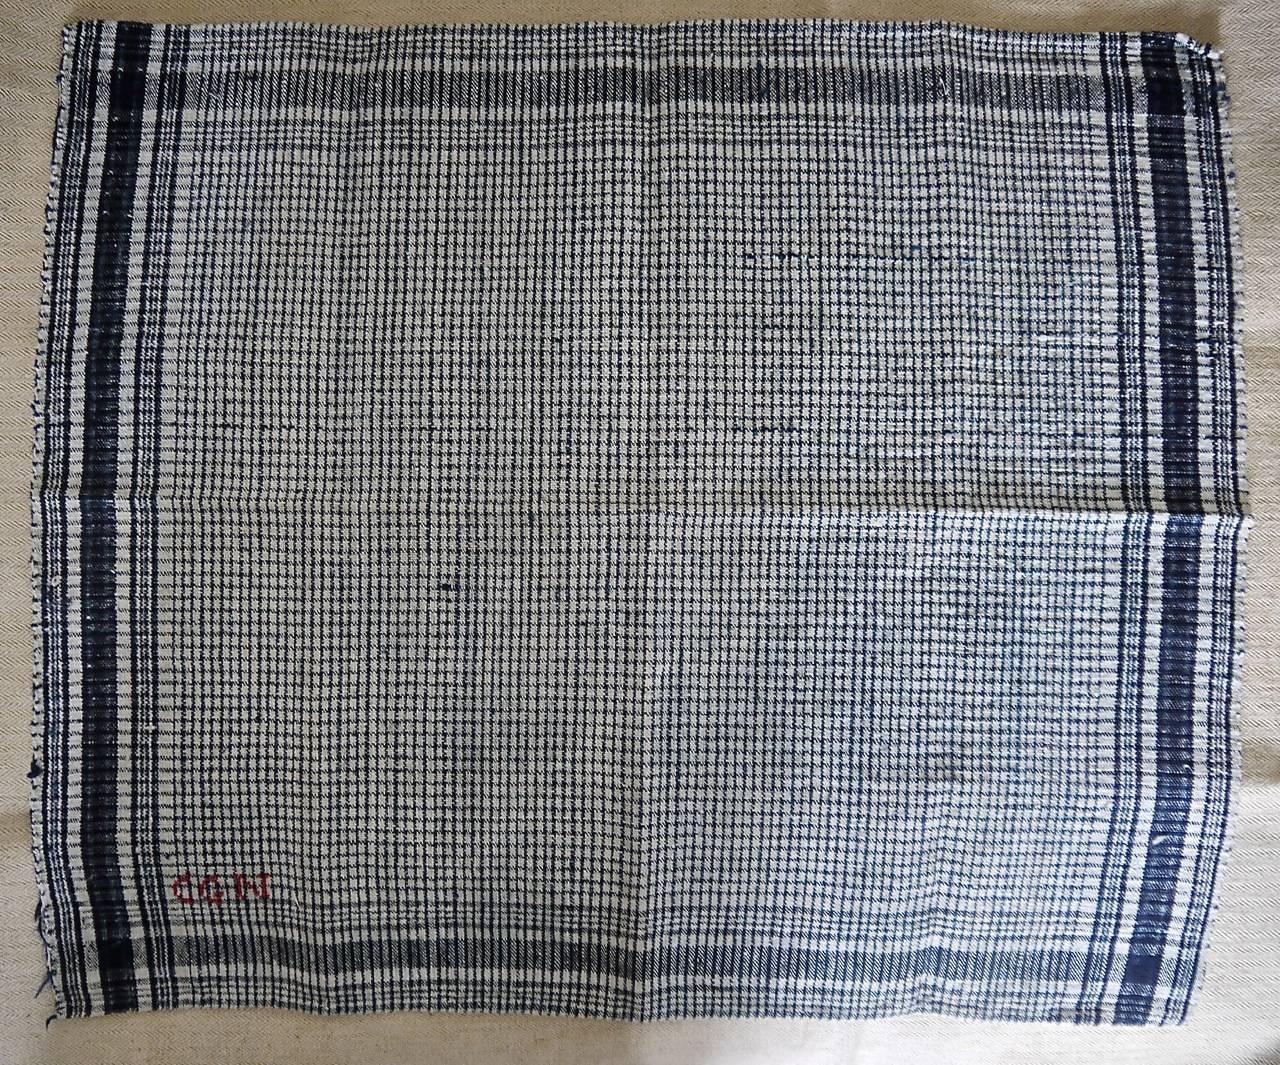 Rustic French 19th Century Monogrammed Indigo Checked Linen Square For Sale